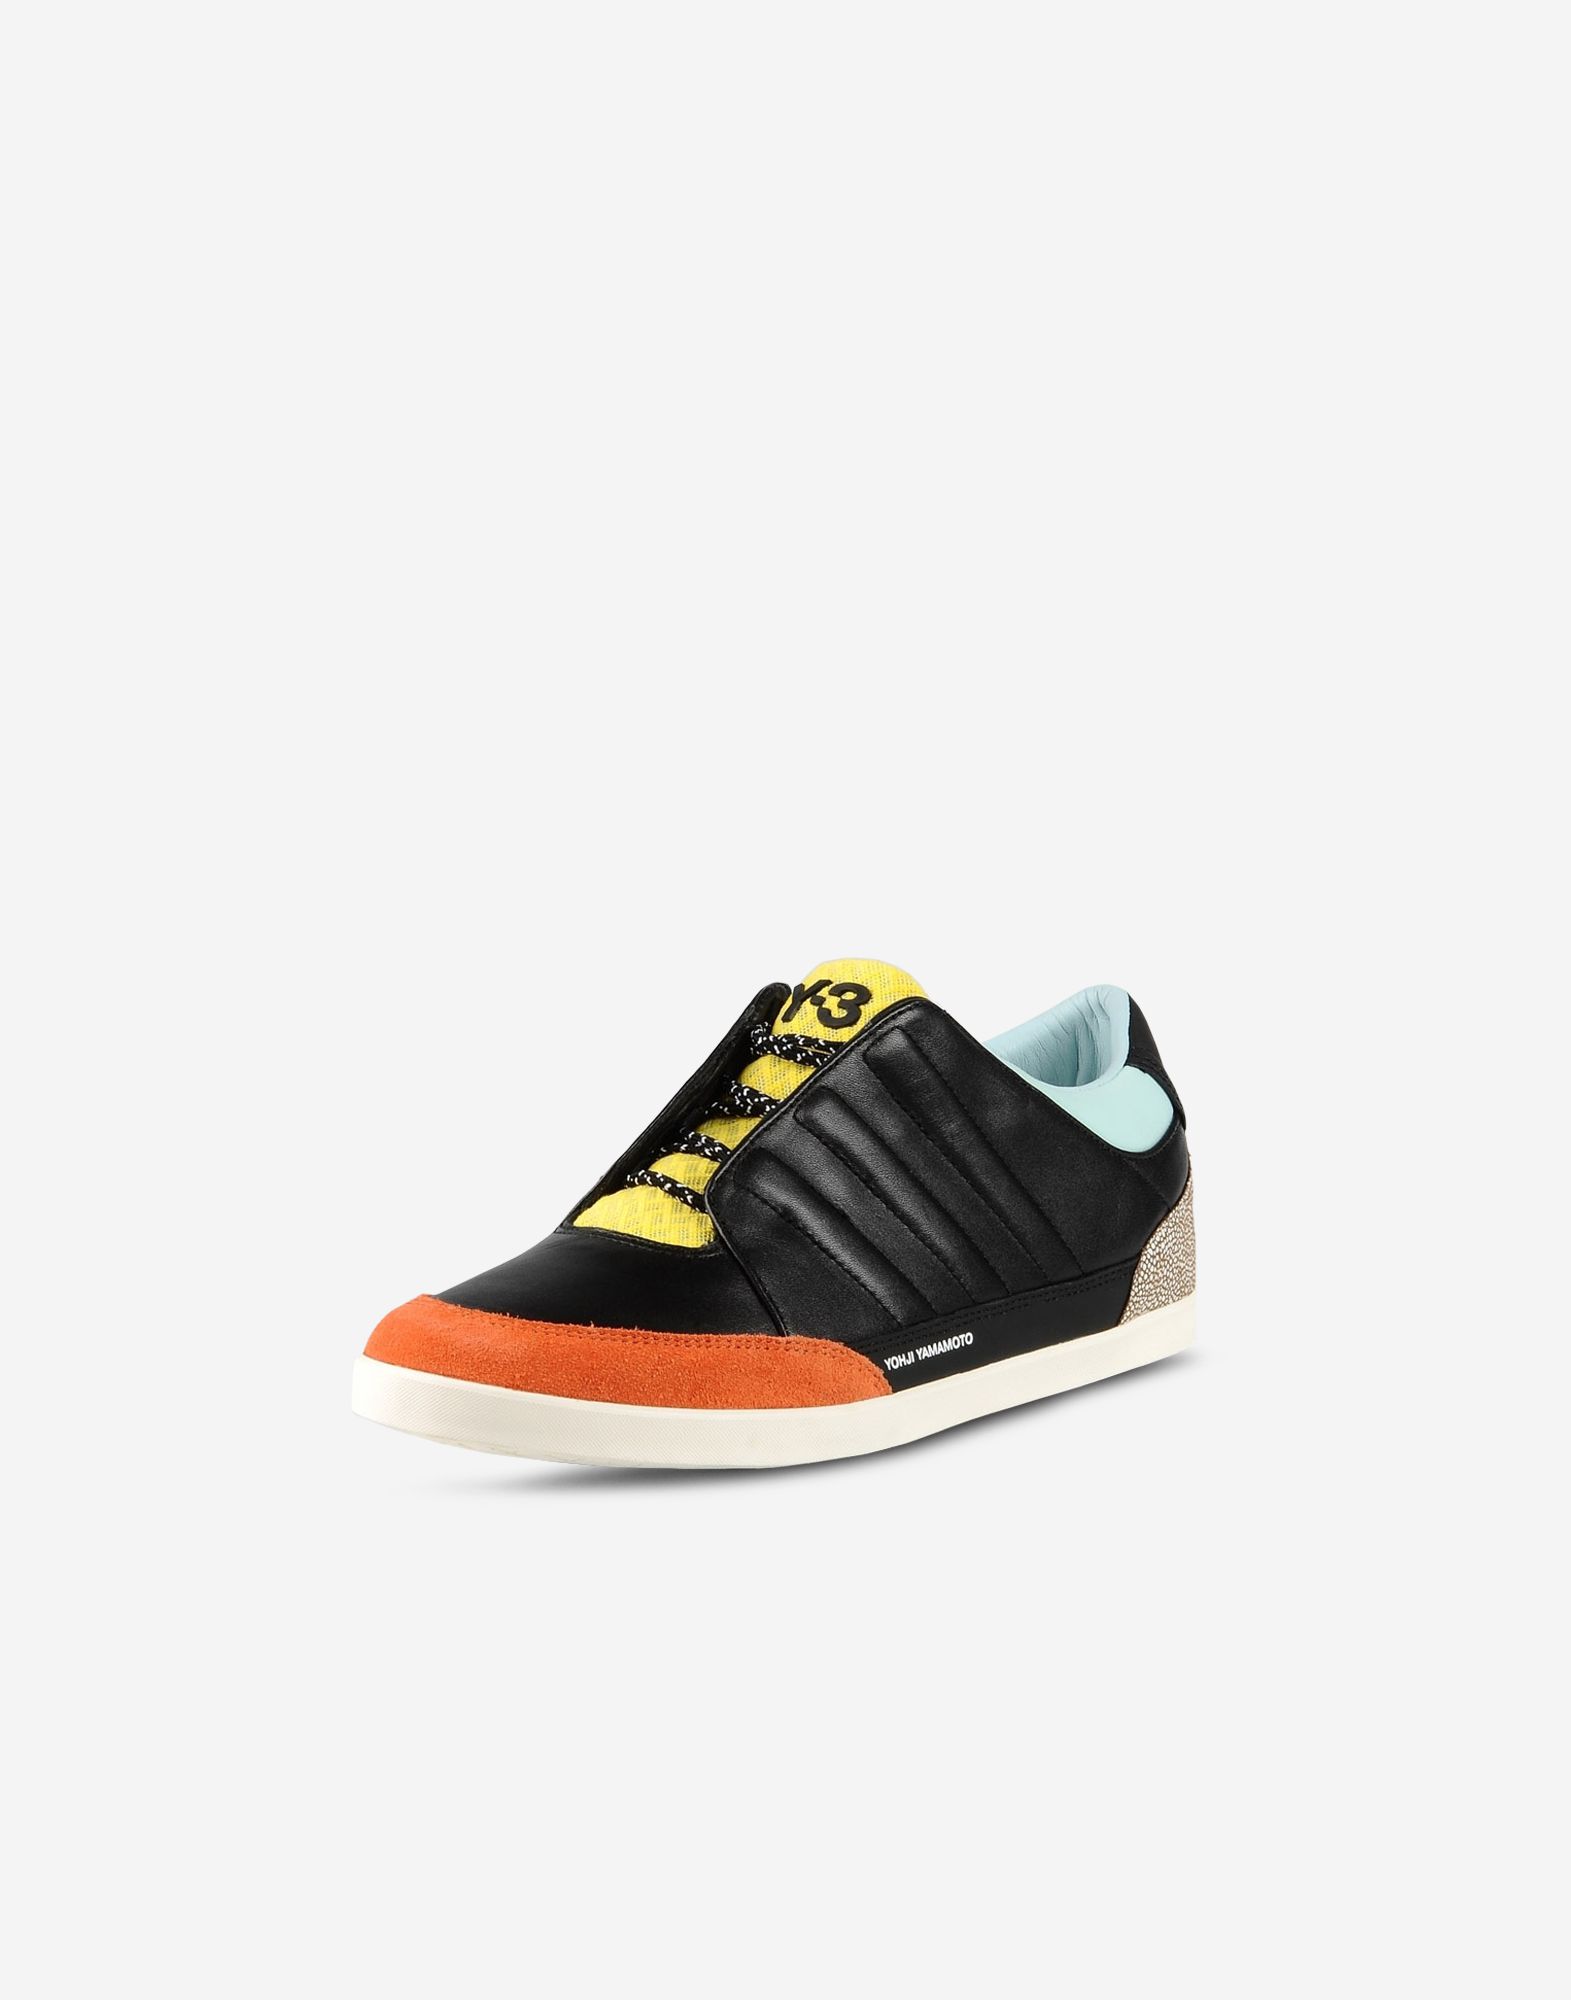 Y 3 Honja Low for Men | Adidas Y-3 Official Store